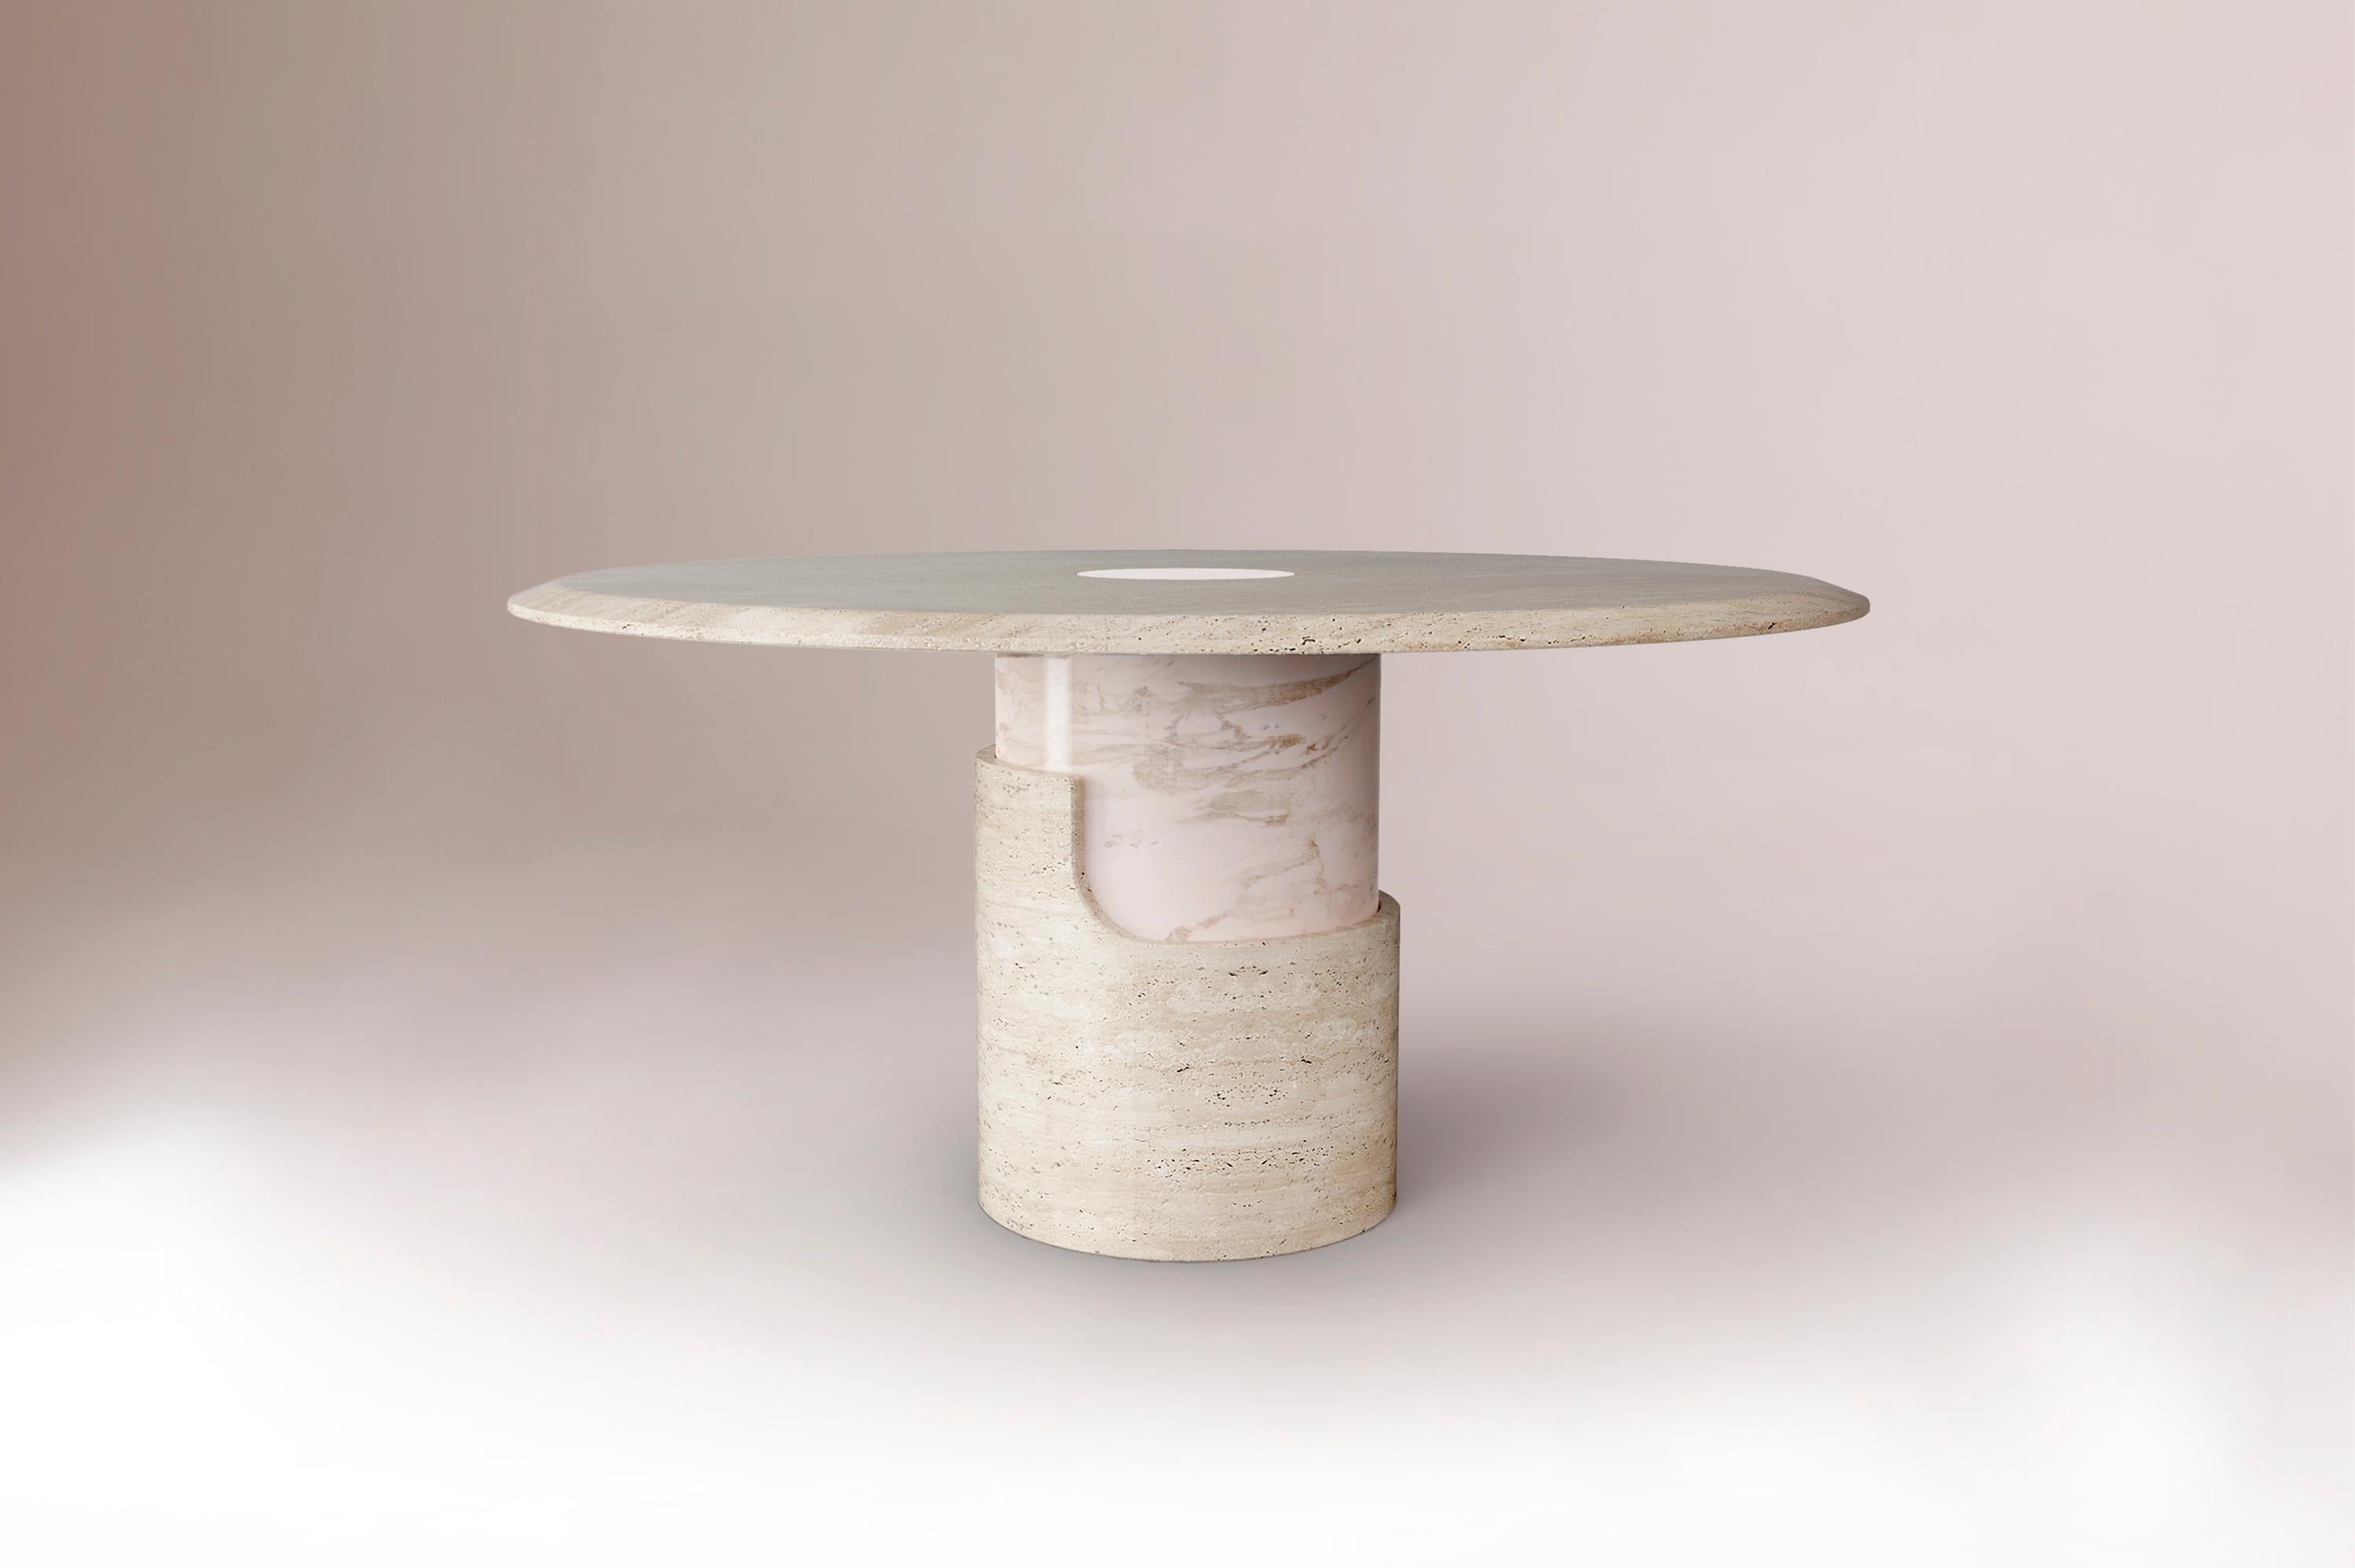 Braque Contemporary Dining Side Table by Dooq
Dimensions:  D 150 x H 55 cm
Materials: Entirely hand made in marble

Product
The Braque Side Table is an elegant and slick side table created by Dooq. Braque is entirely hand made in marble, with a